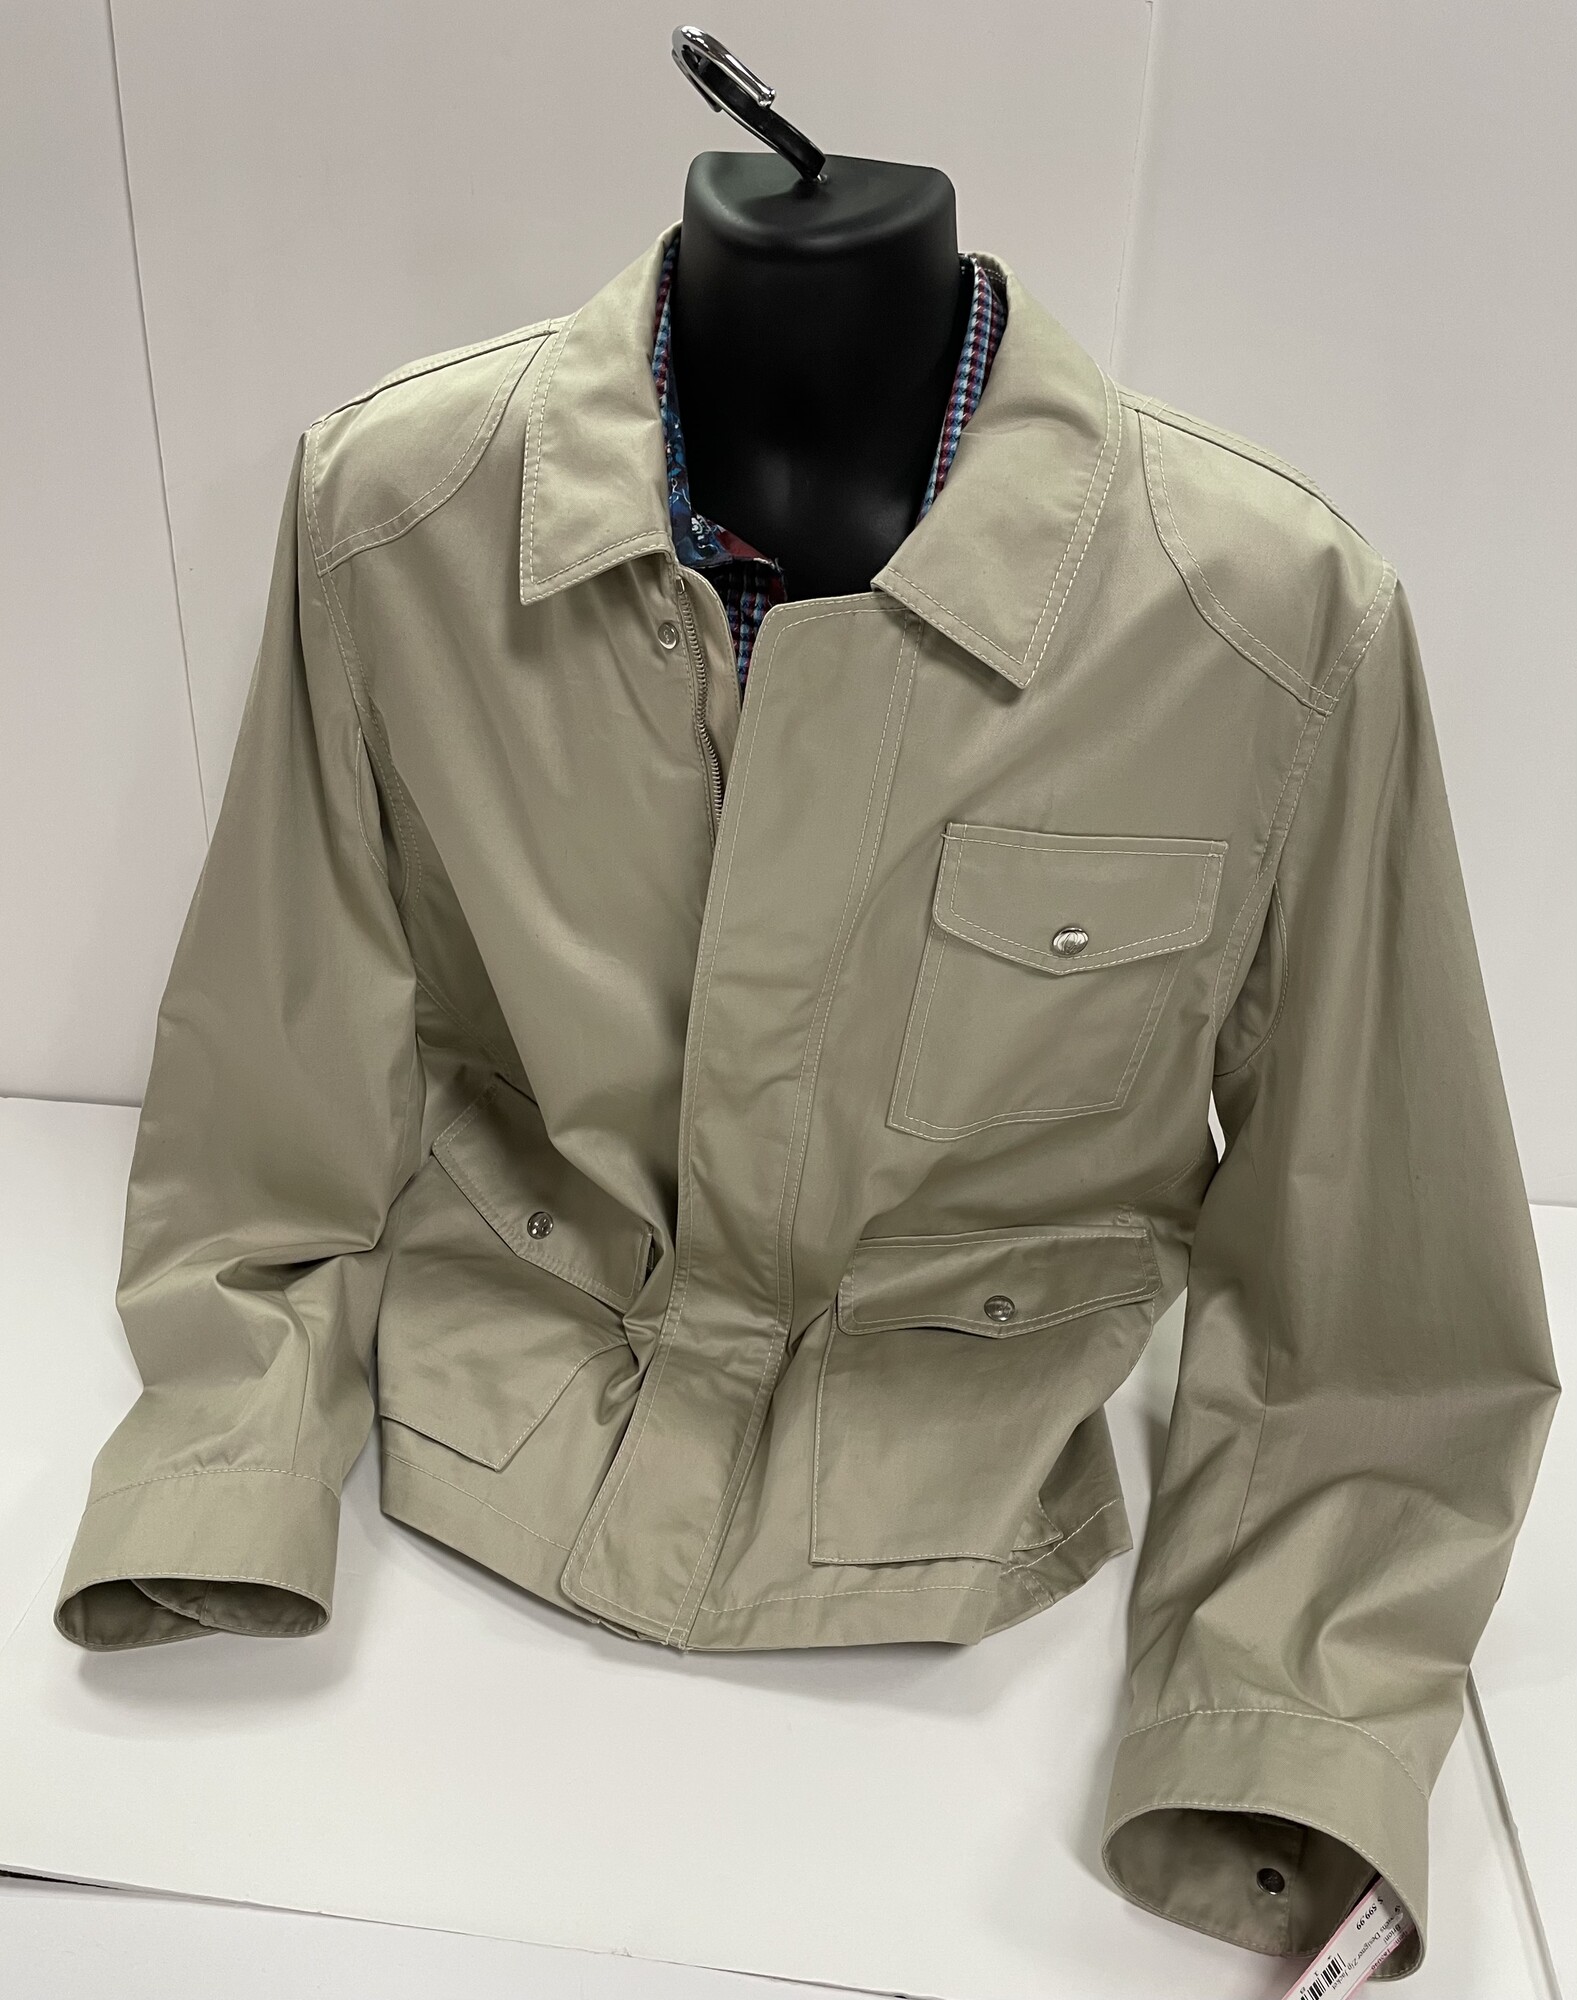 Brioni:  Mens Designer Zip Jacket, Beige, Size: XL
This jacket is in perfect condition and would make a great addition to any man's wardrobe.